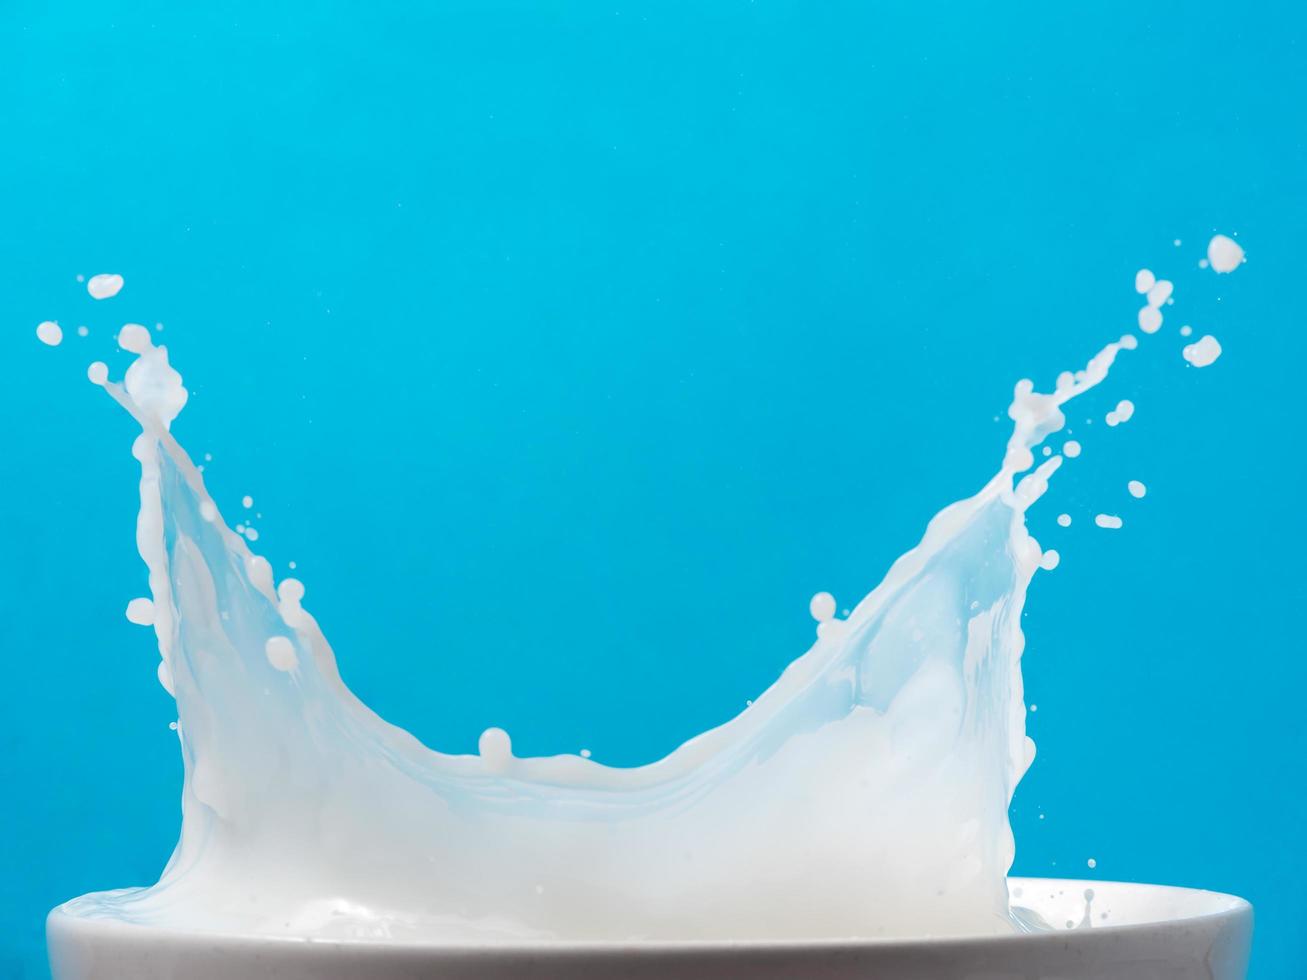 Splash of milk from a cup on blue background. photo